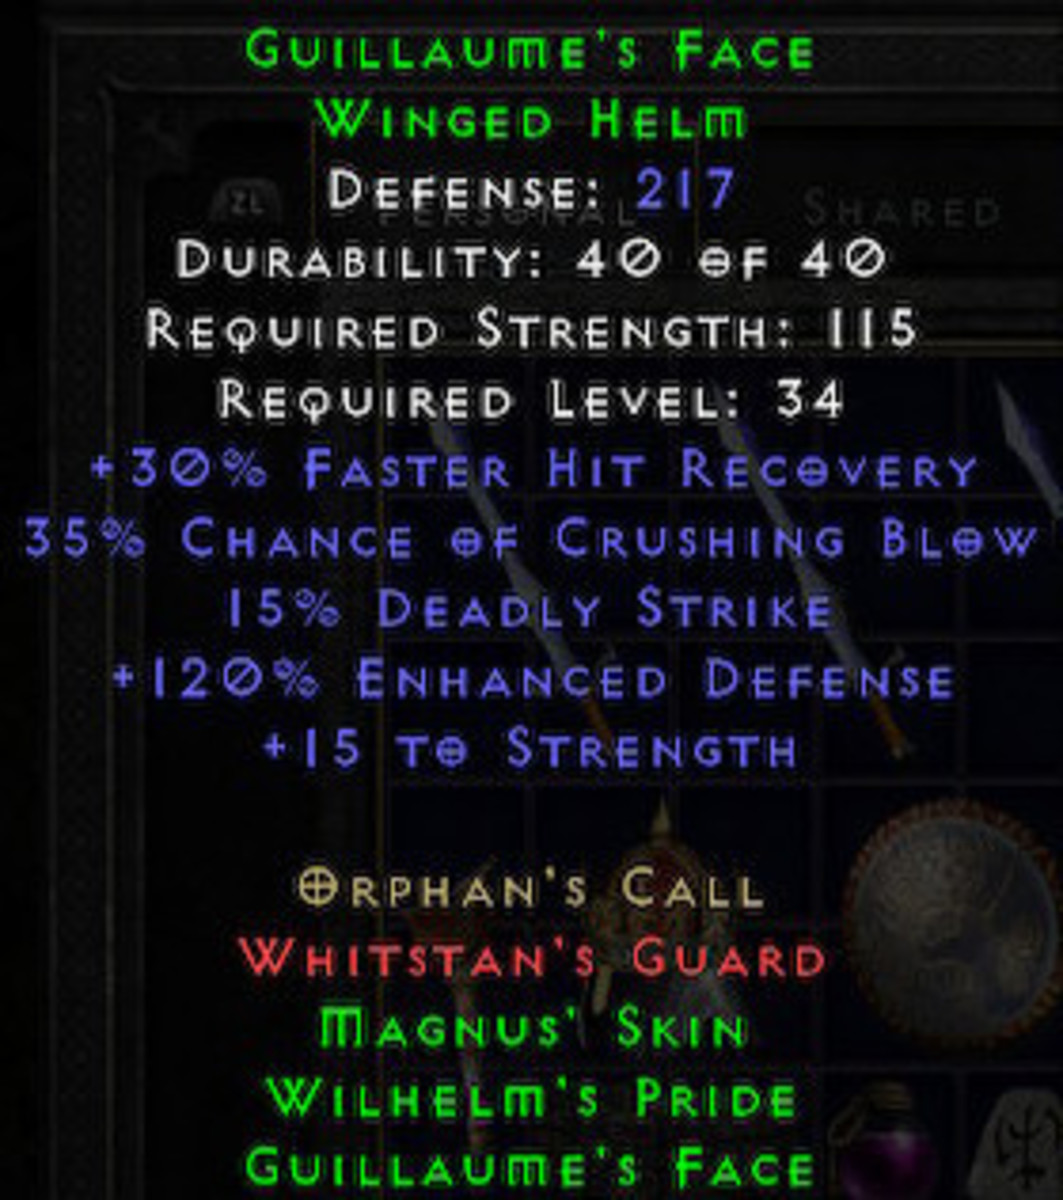 This helm can offer faster hit recovery.